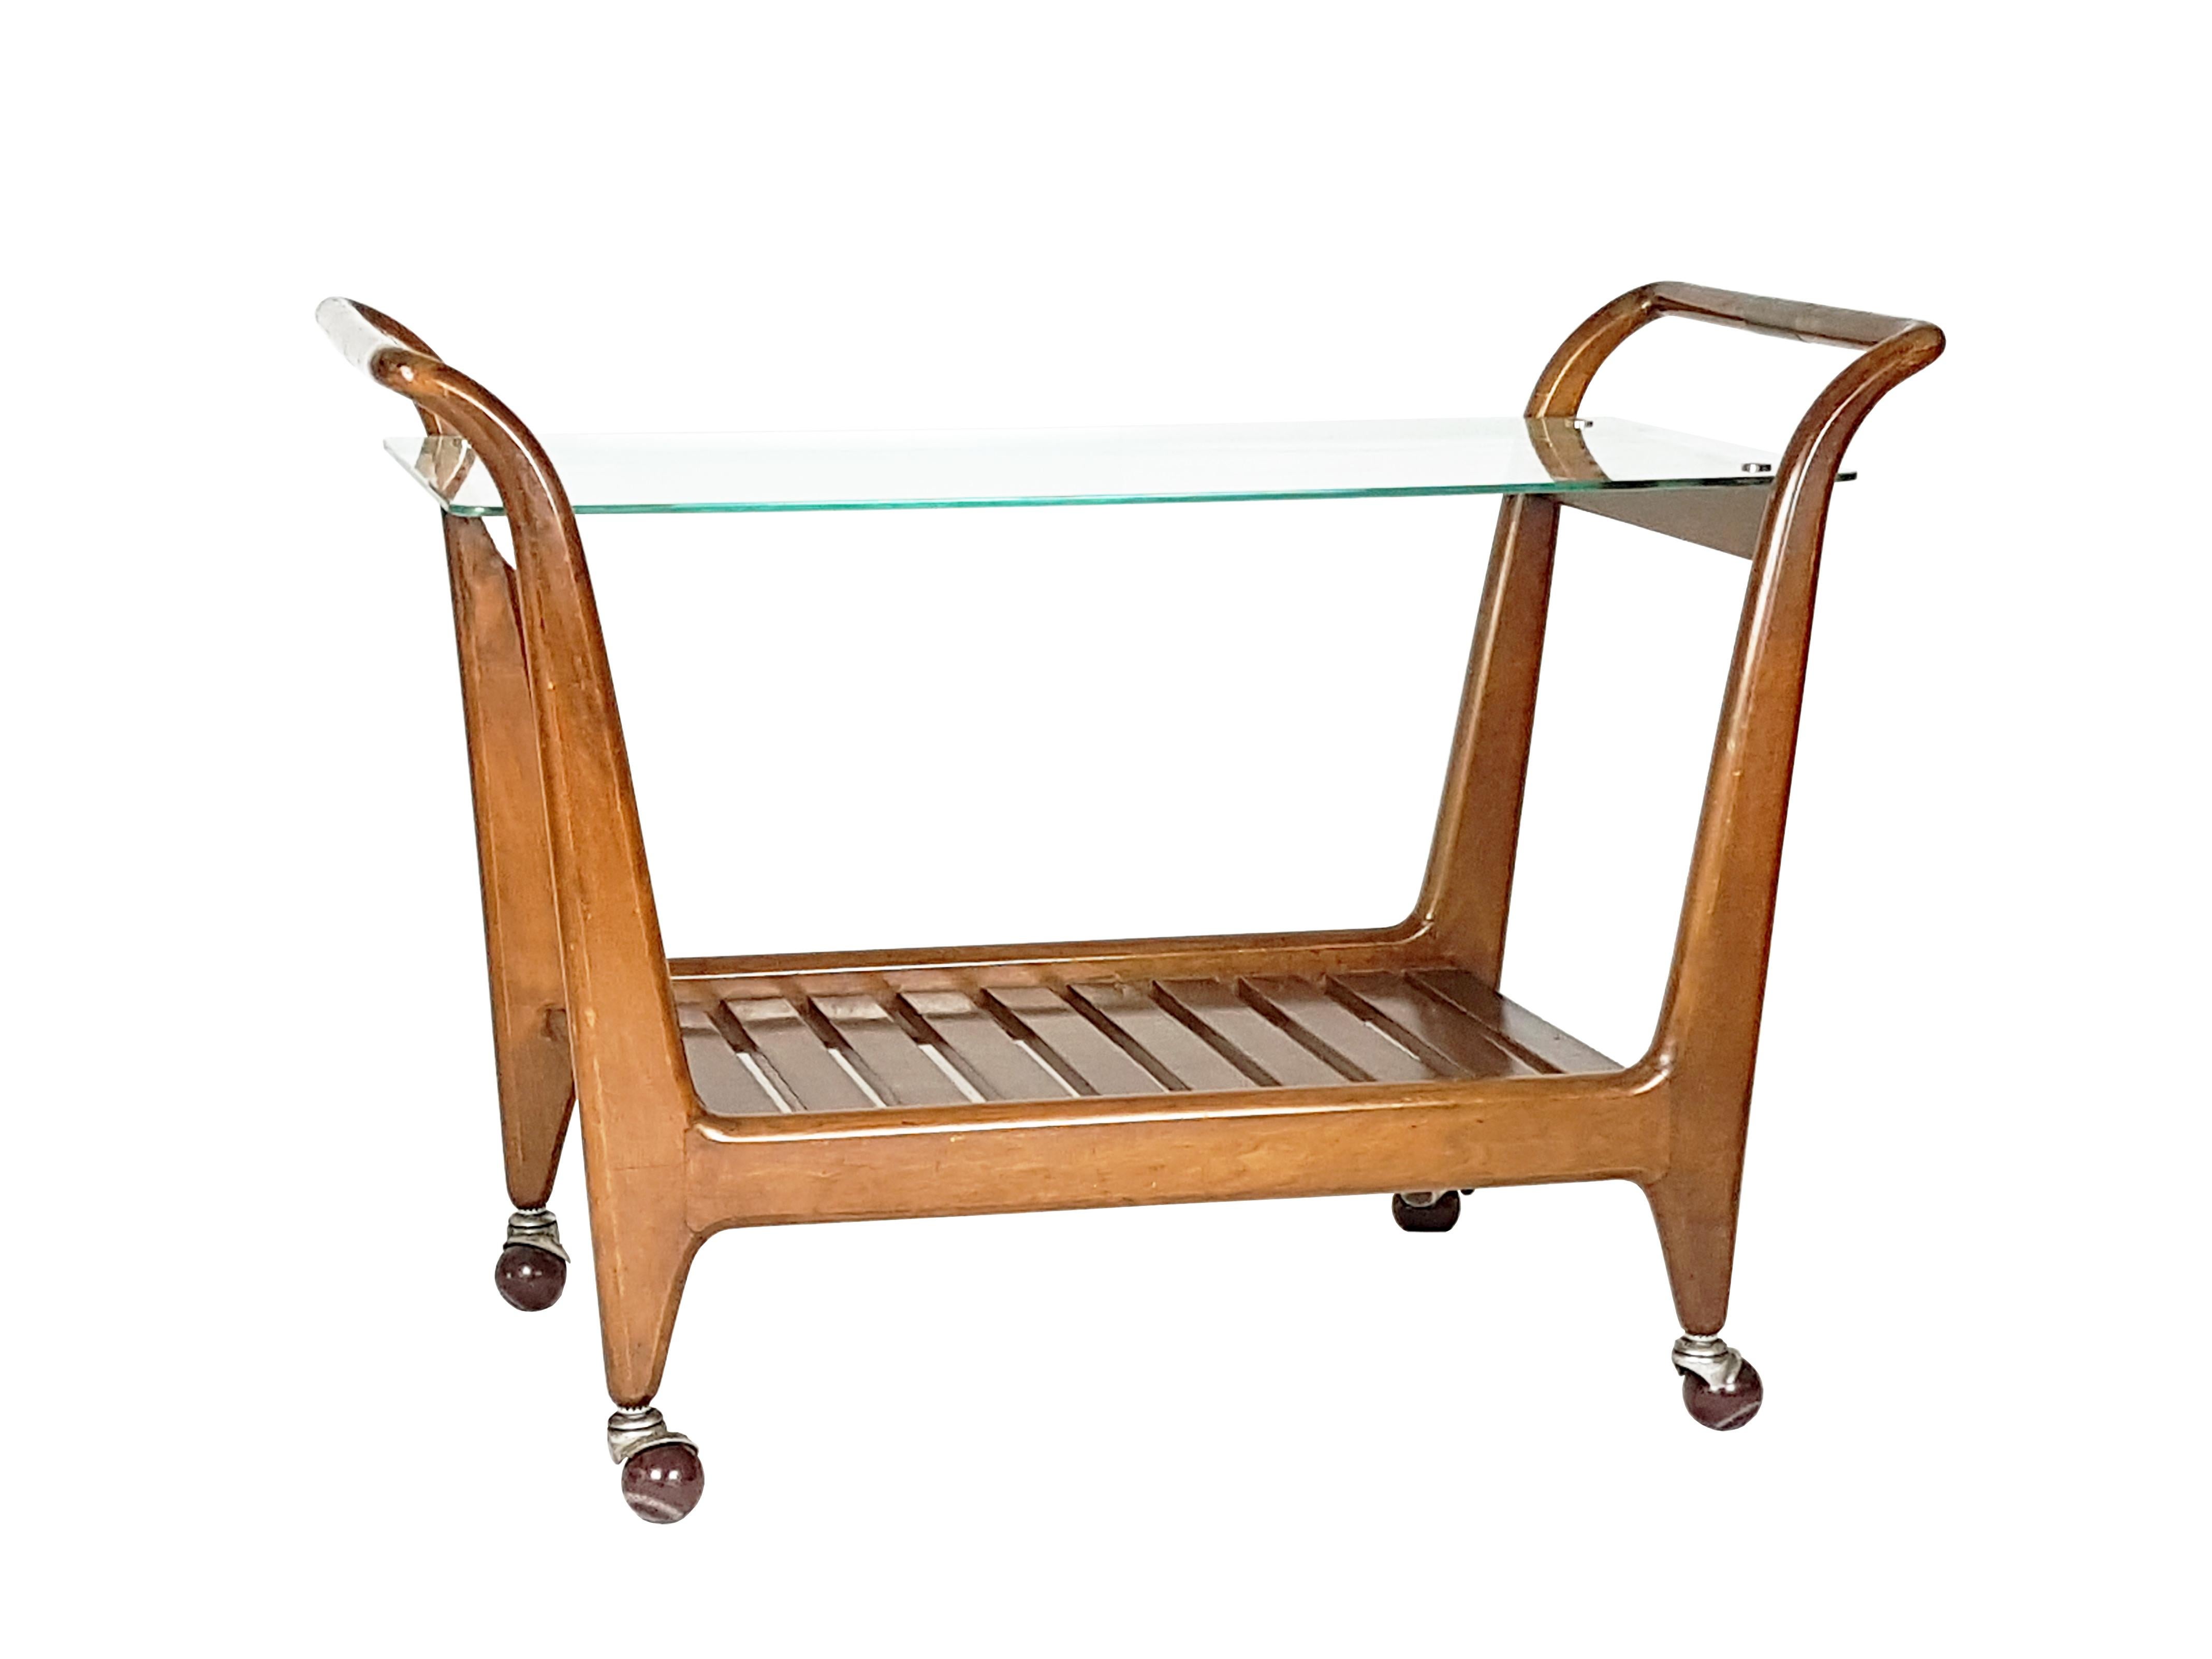 Wooden structure with glass shelf and brass handles. Overall good condition.
R. Aloi, L'arredamento moderno, IV serie, 1949. Fig 482.